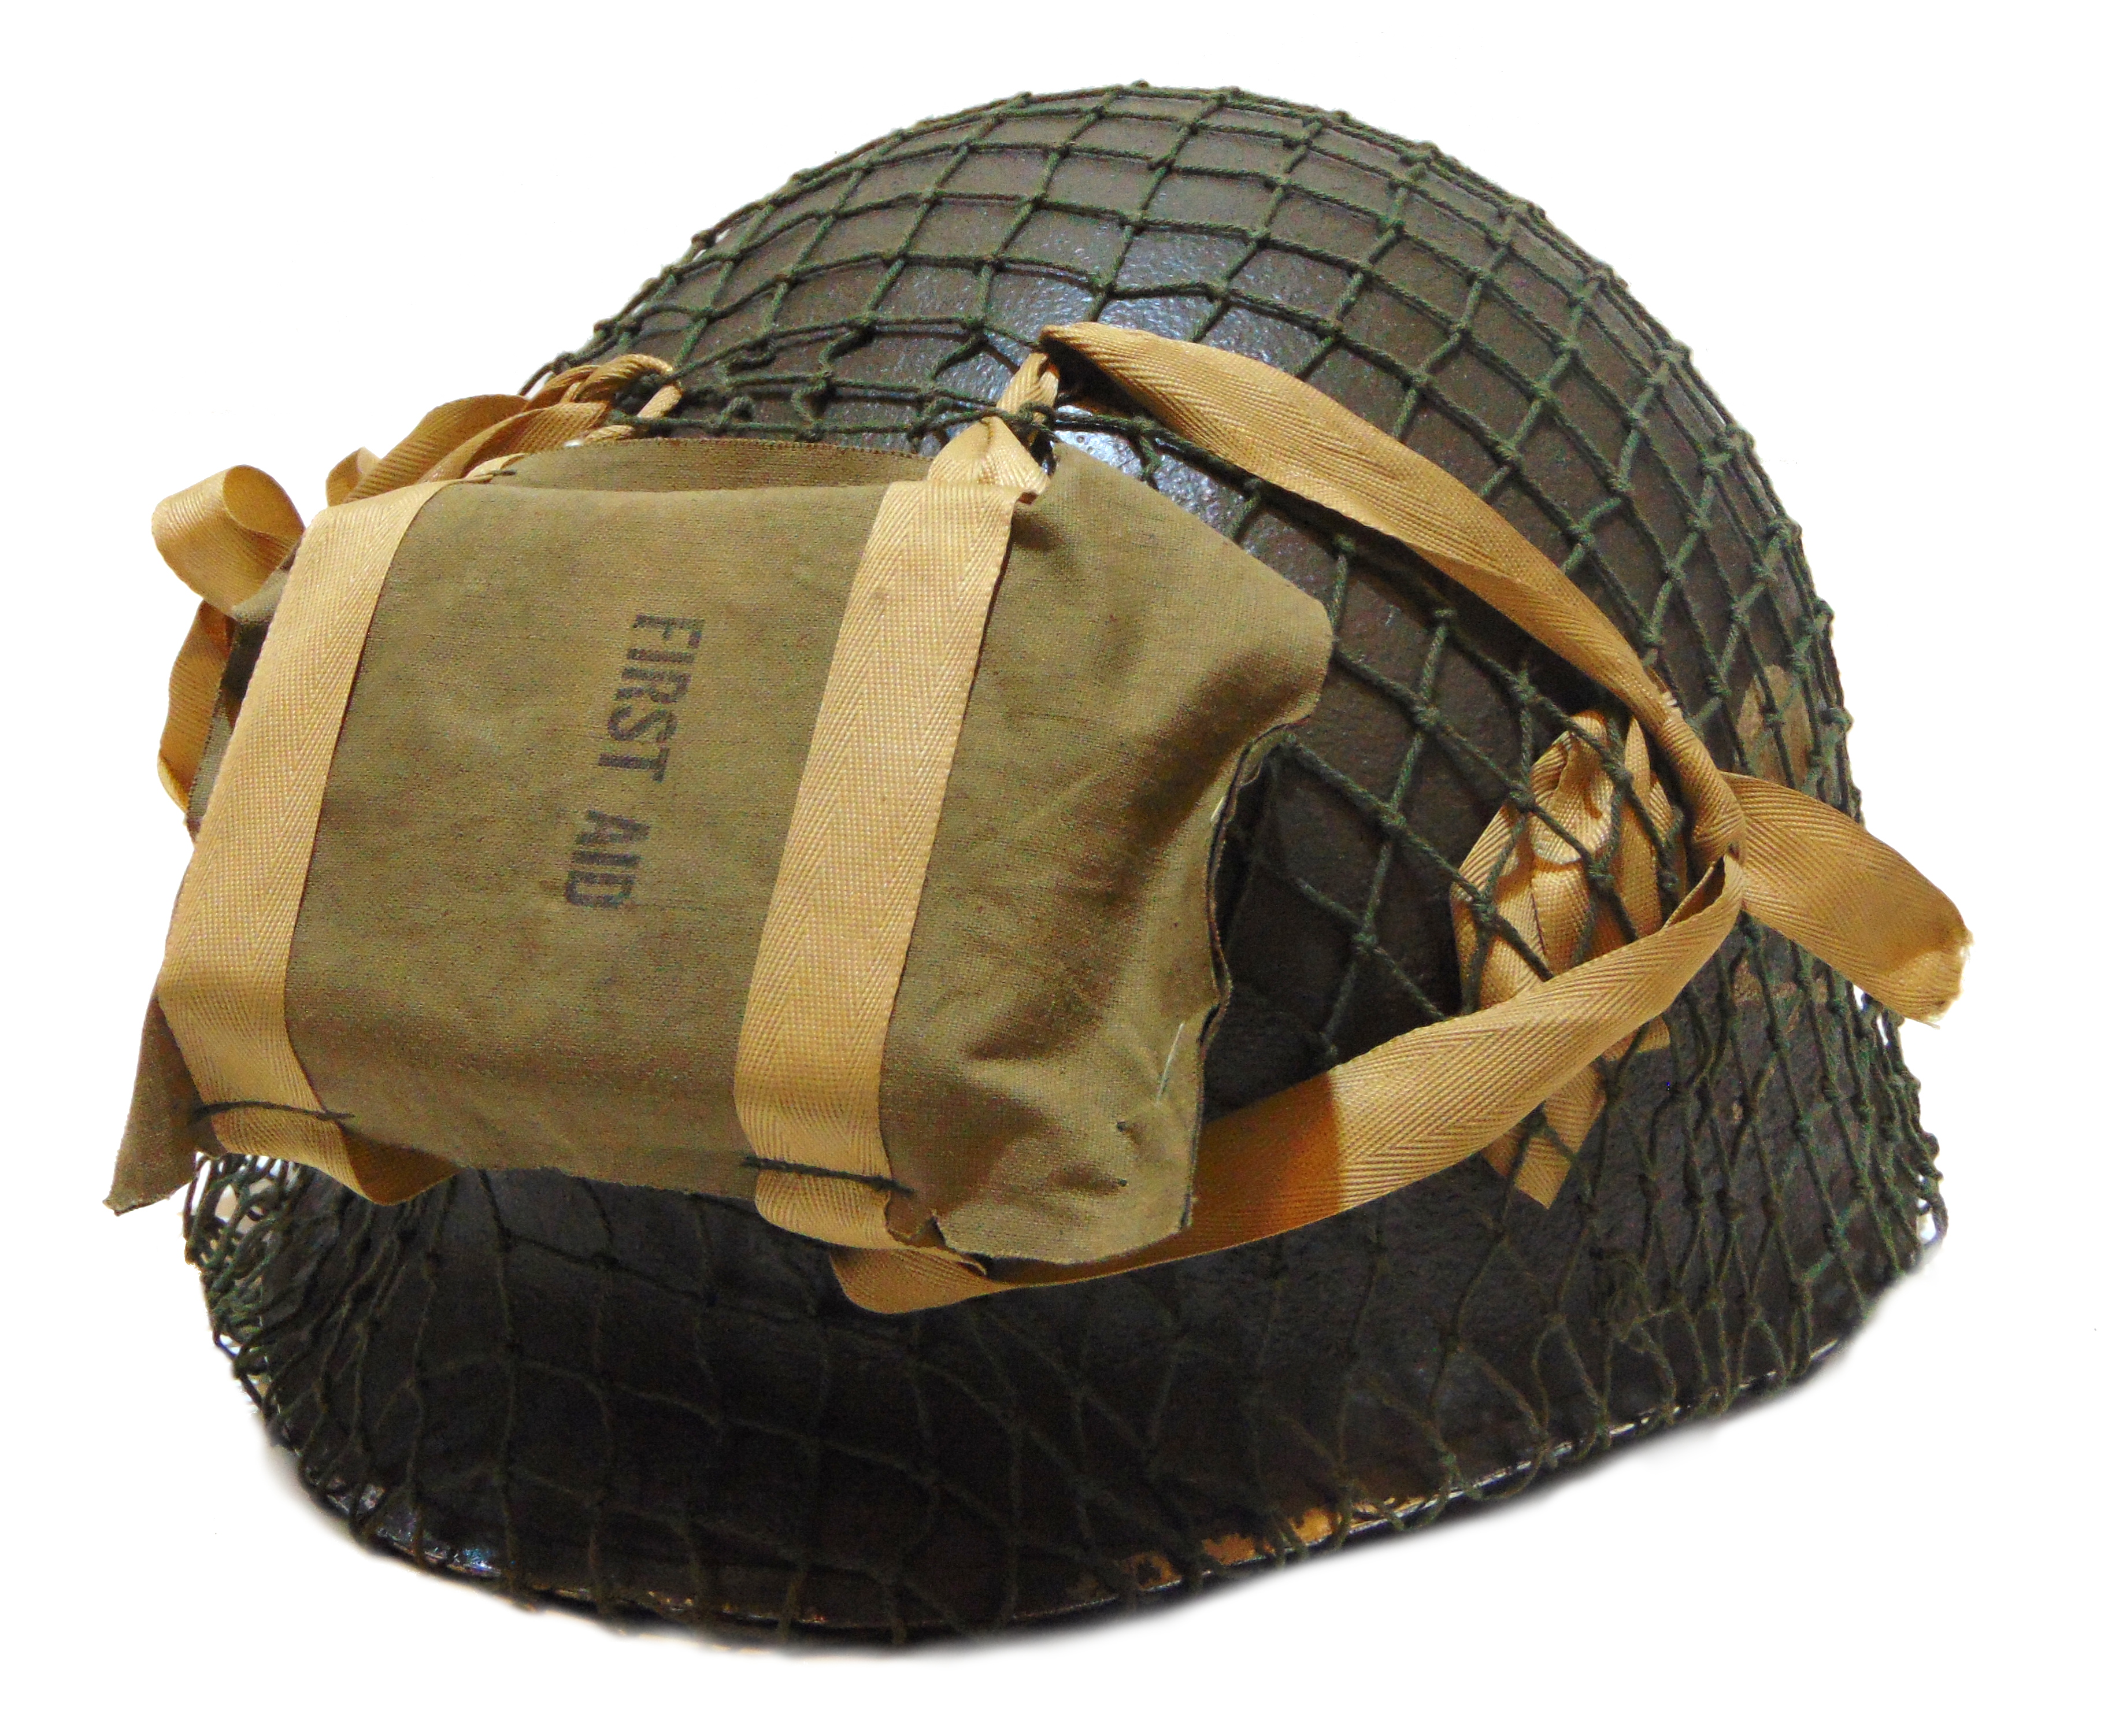 US Helmet with Parachute First Aid Packet